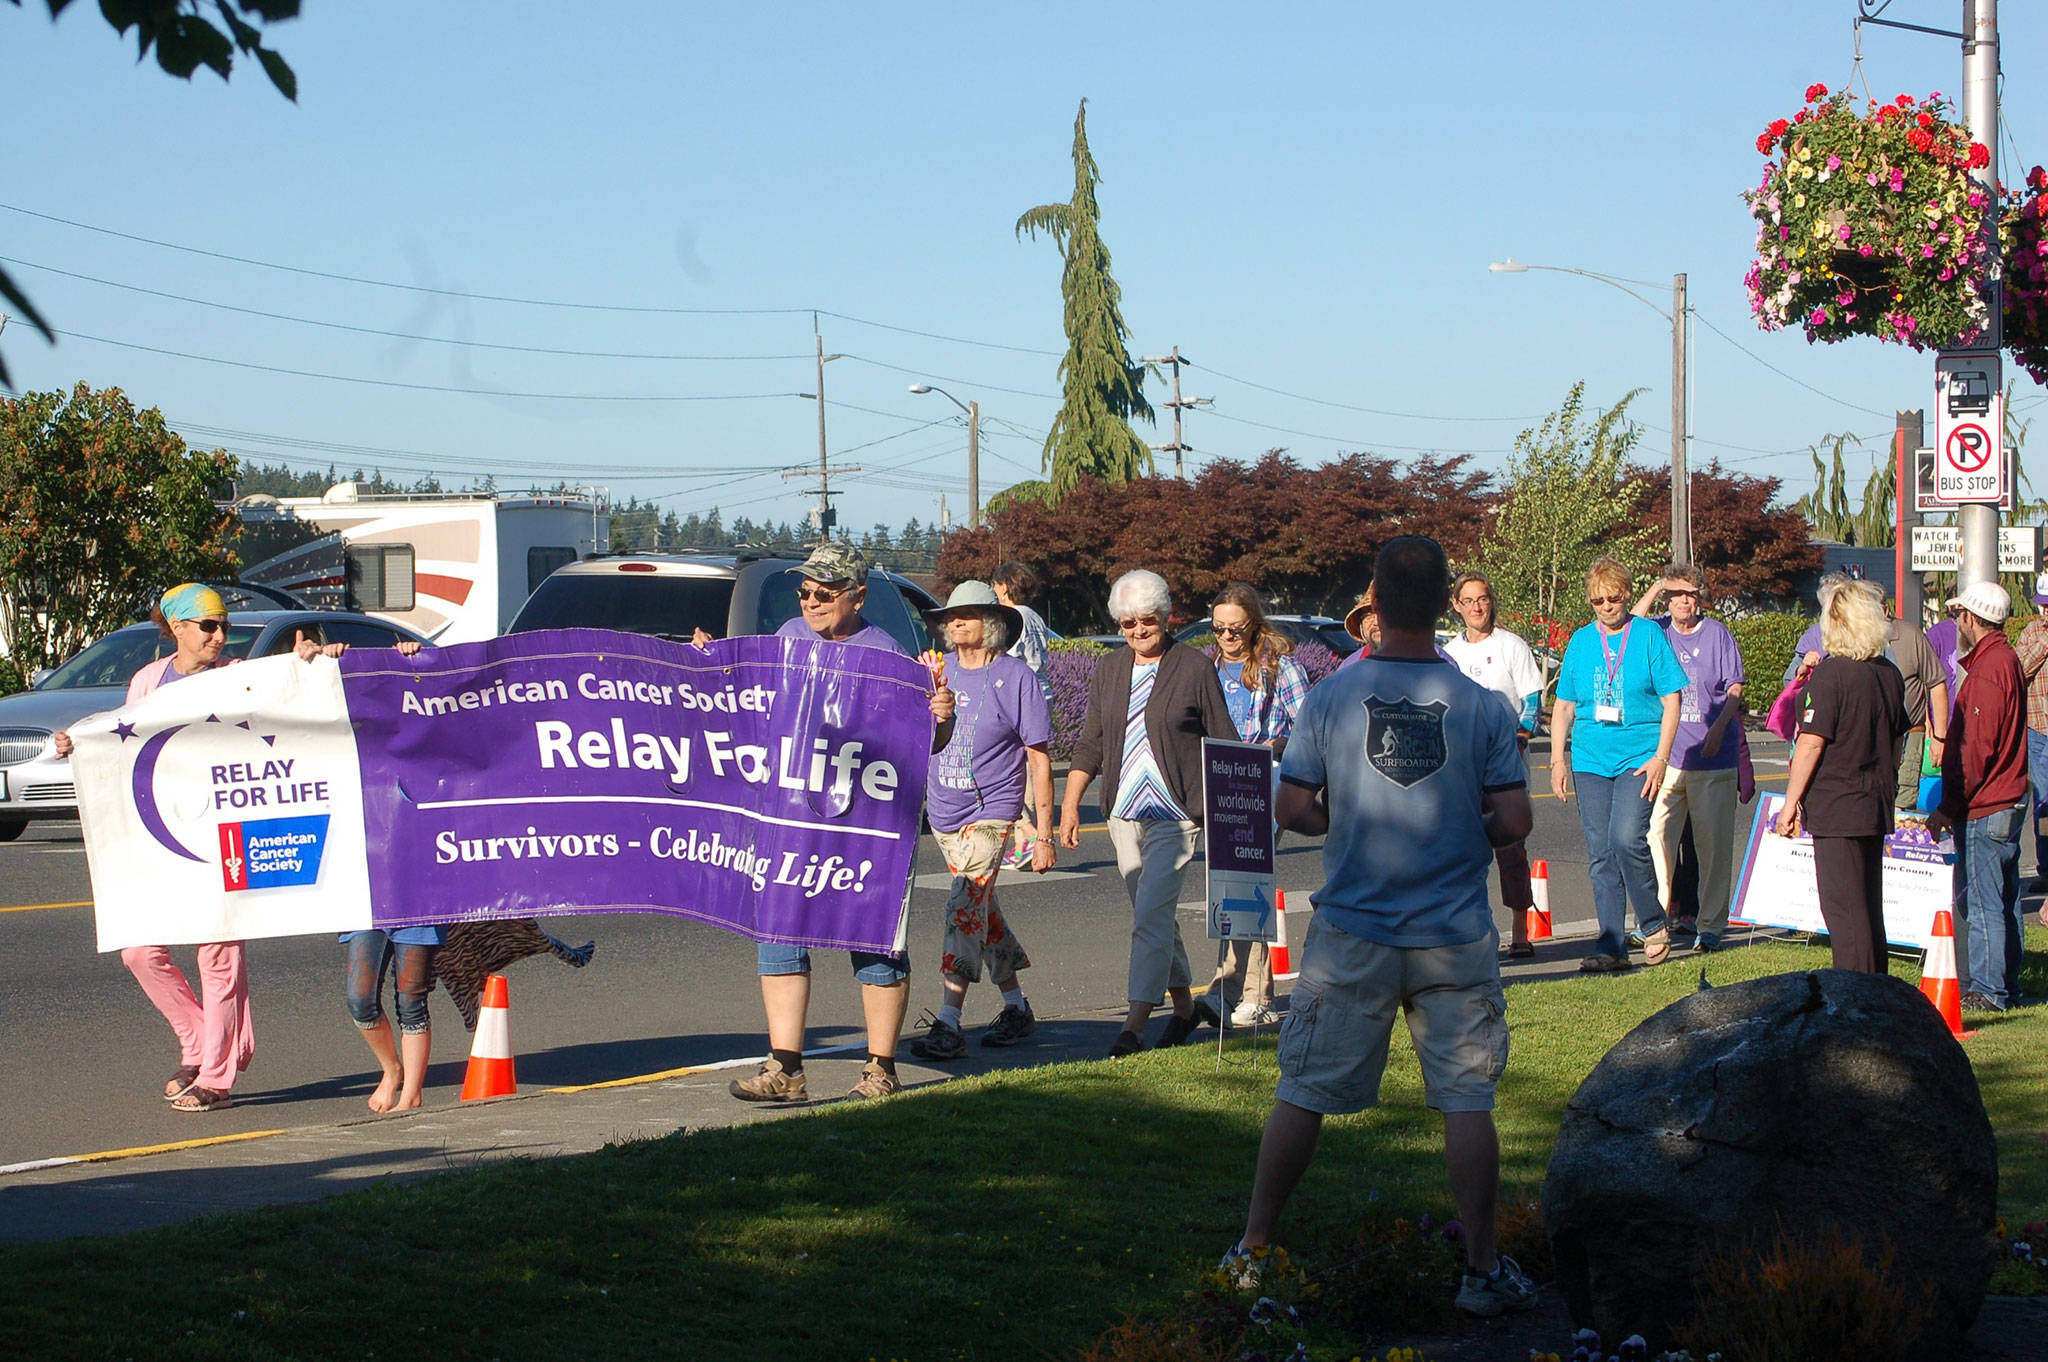 Participants in the American Cancer Society’s Relay for Life Clallam County walked around Pioneer Memorial Park in Sequim to kick off the annual ceremony on Friday, July 28. Sequim Gazette photo by Erin Hawkins